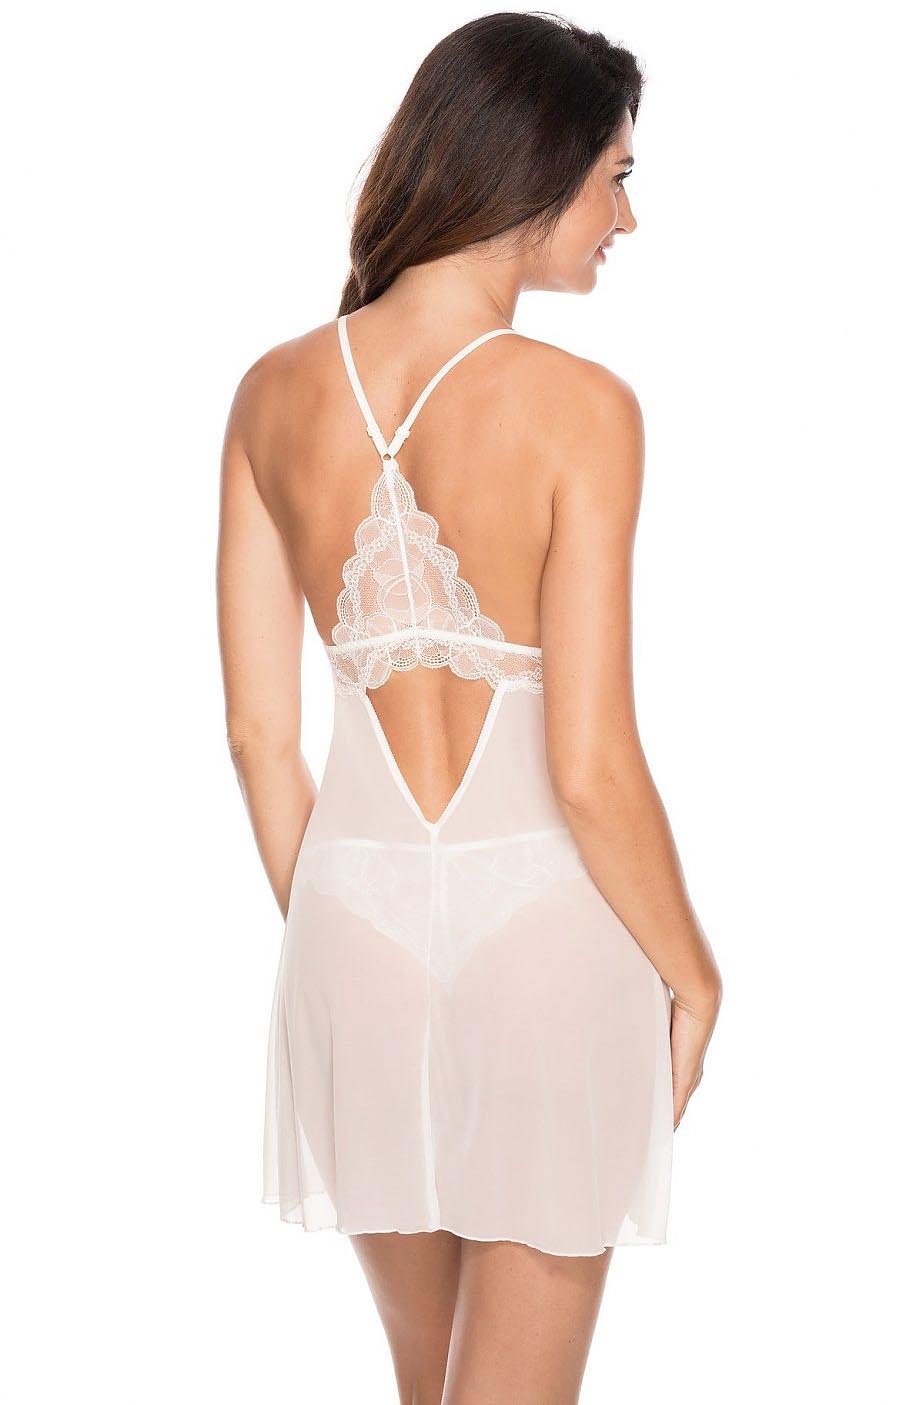 Delicate Sheer Lace & Mesh Luxe Bridal Chemise